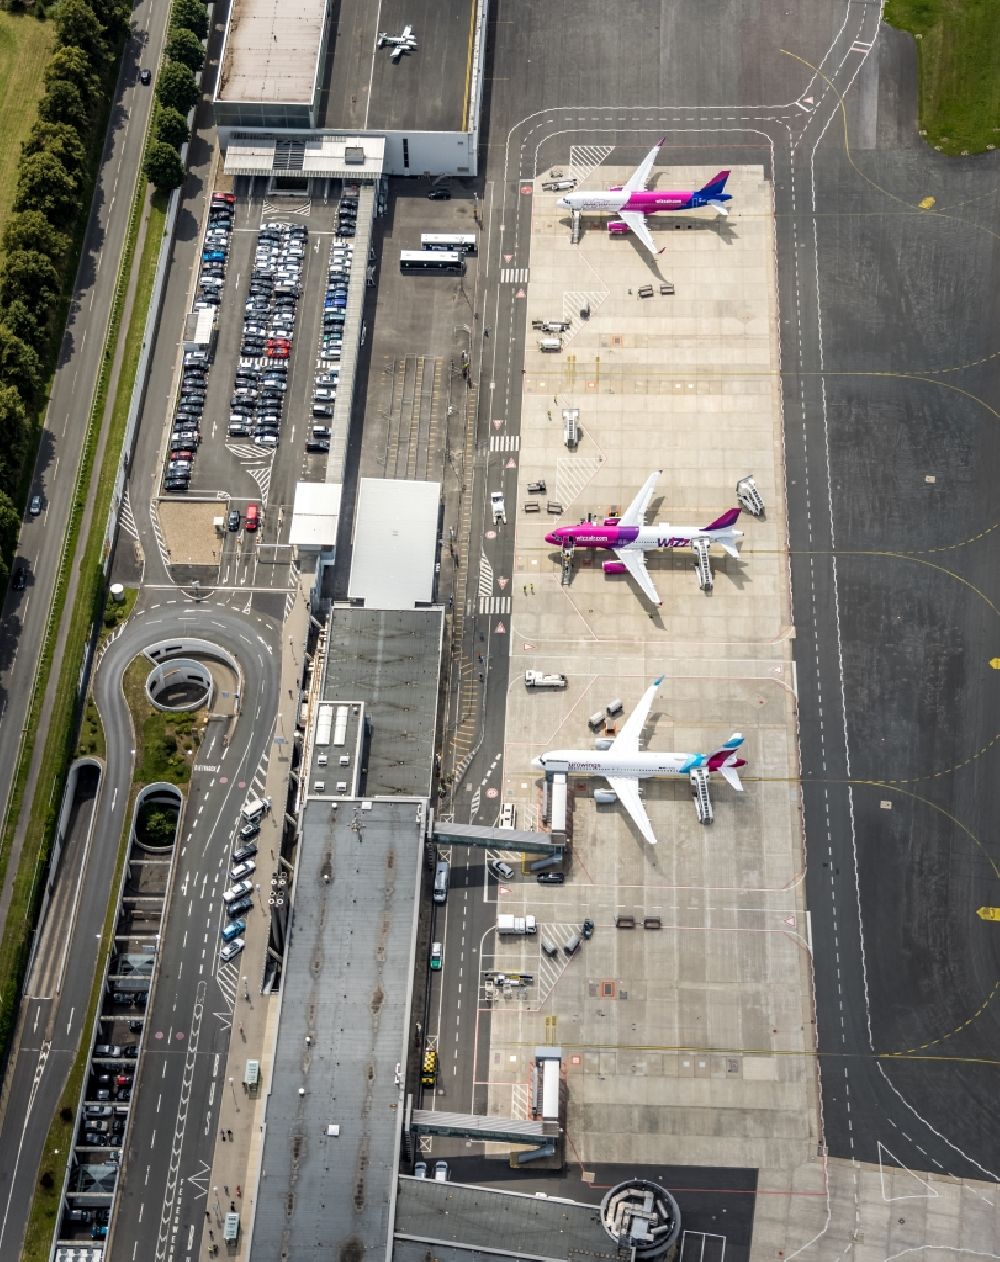 Aerial photograph Dortmund - Passenger airplane Airbus in parking position - parking area at the airport in Dortmund at Ruhrgebiet in the state North Rhine-Westphalia, Germany